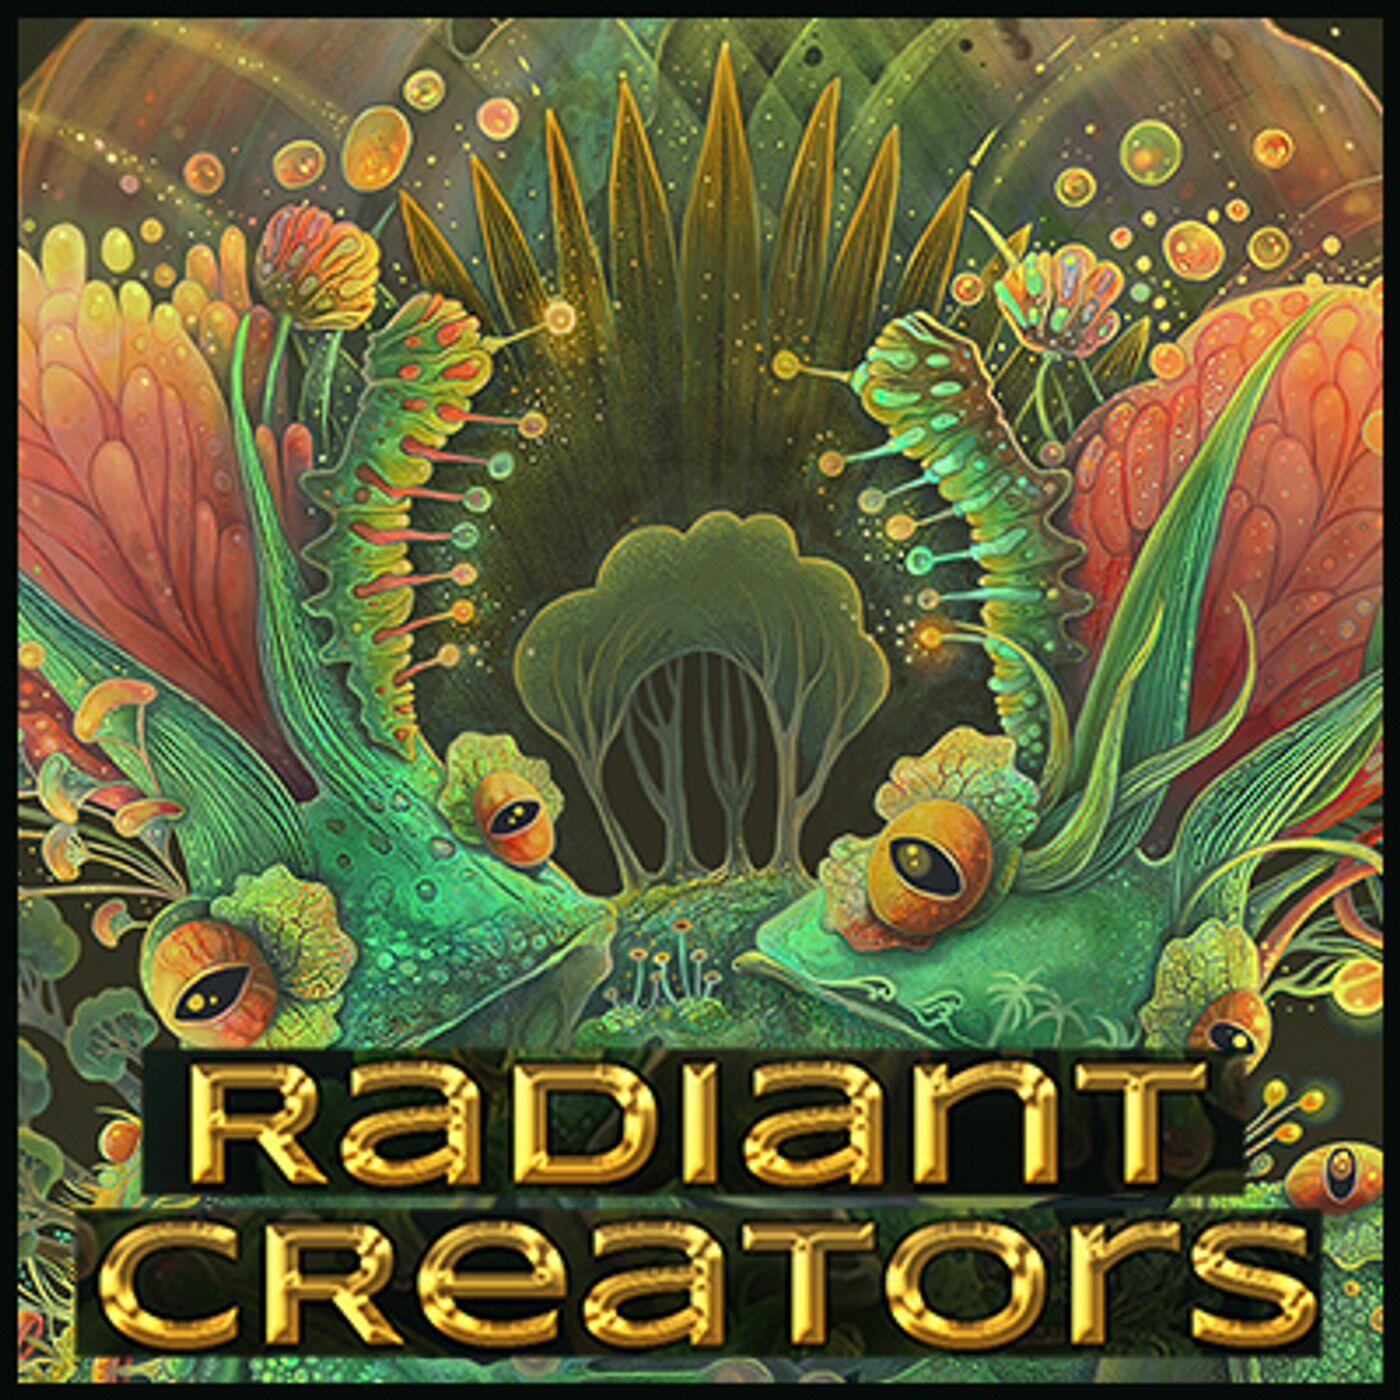 Listen To The Radiant Creators Episode Interview With Vp No - 